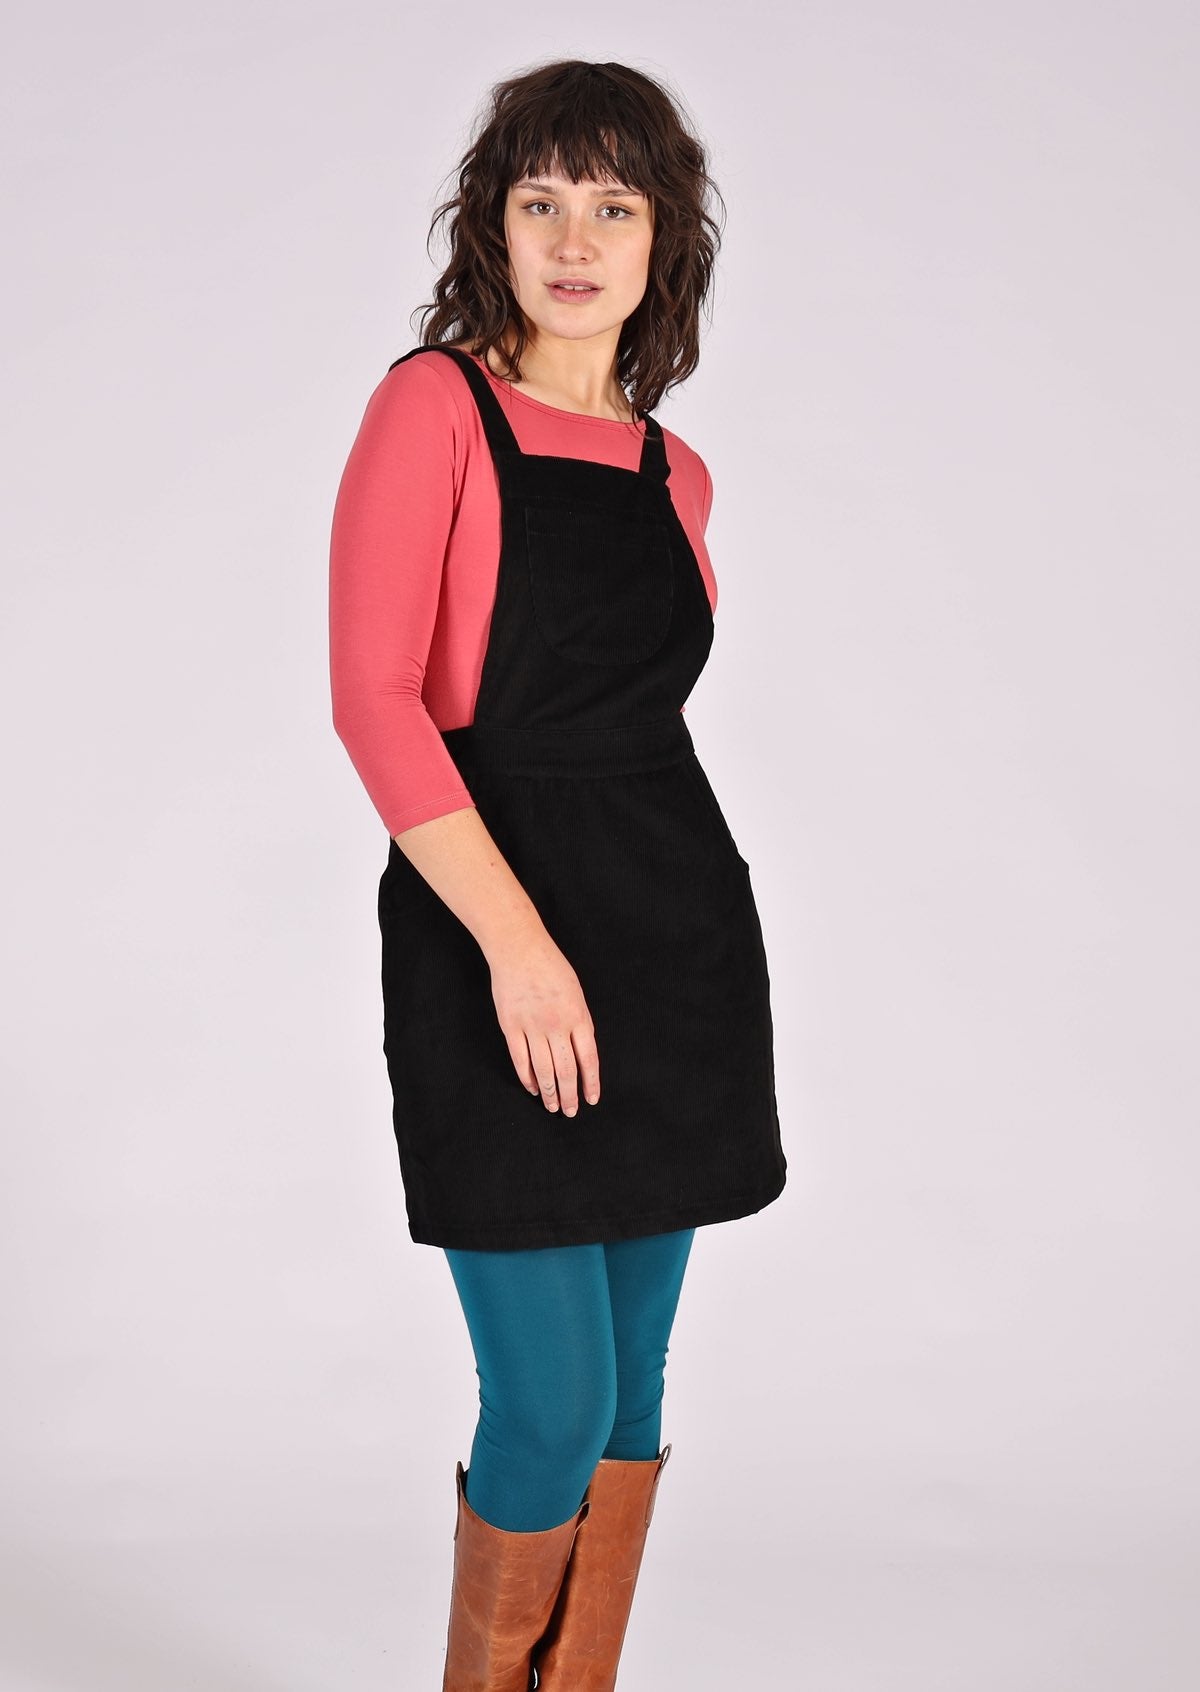 woman wearing black corduroy pinafore over pink top, teal leggings and tan boots